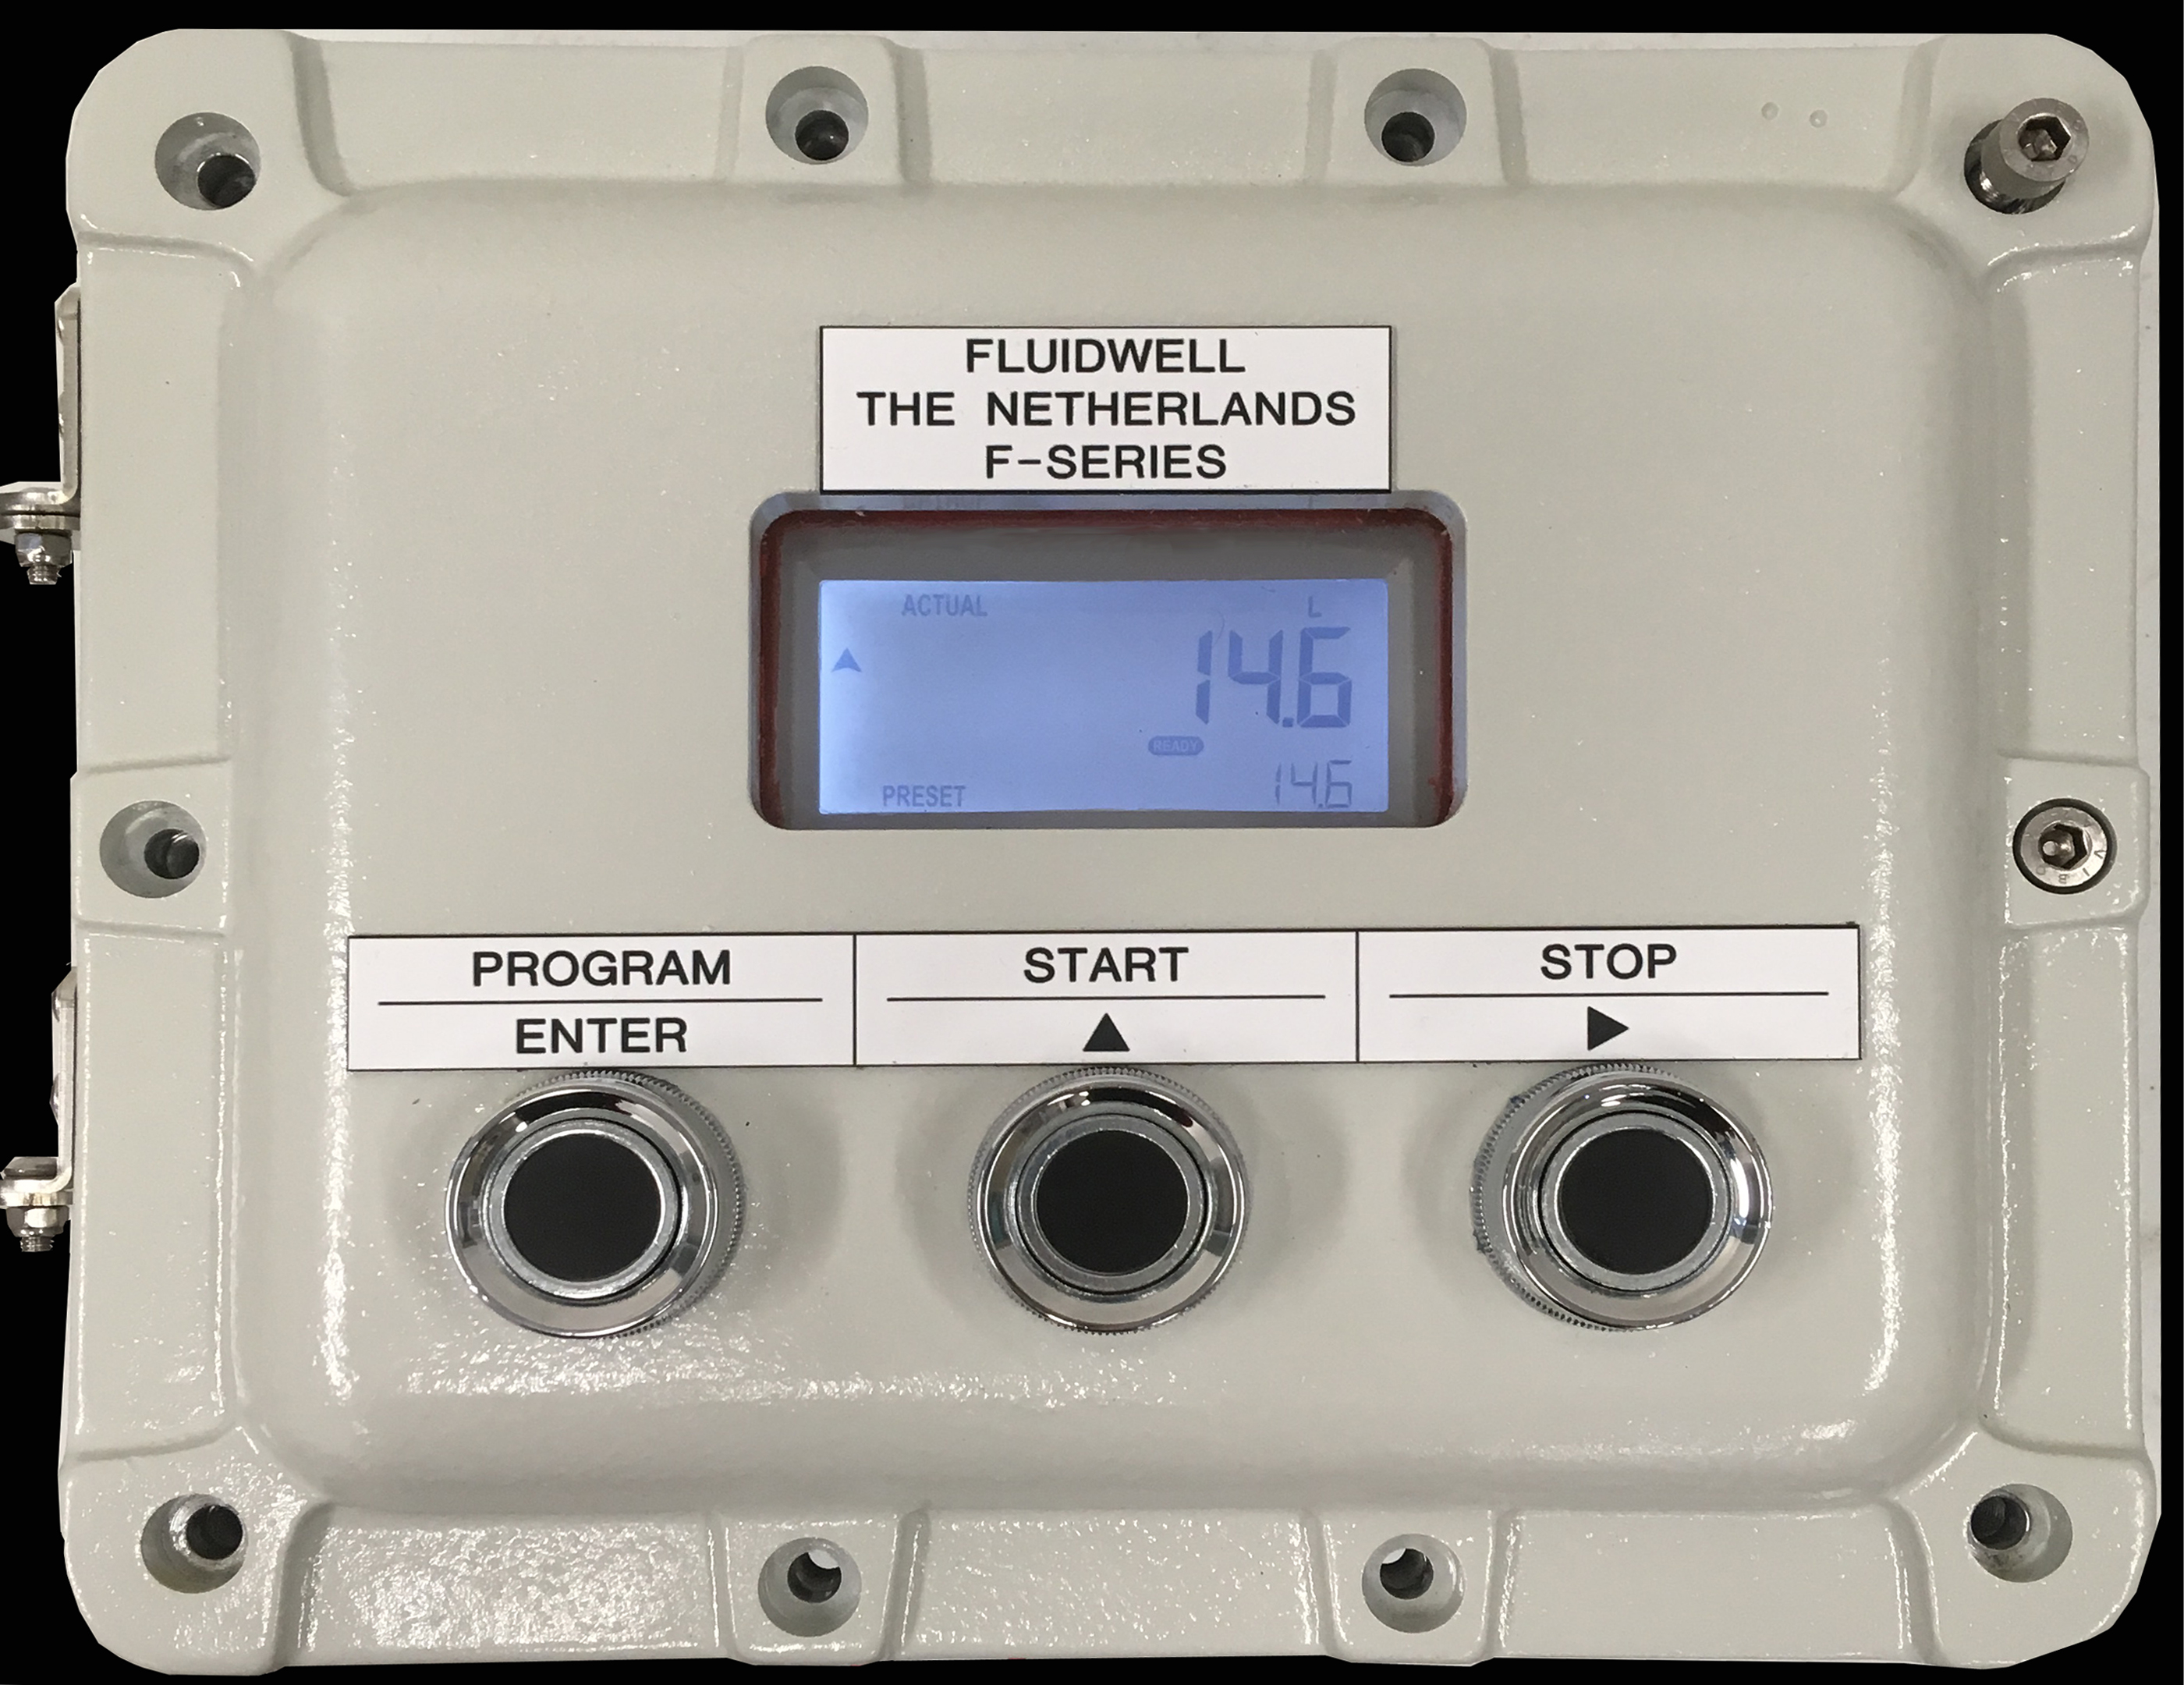 Explosion proof box for Fluidwell displays and controllers